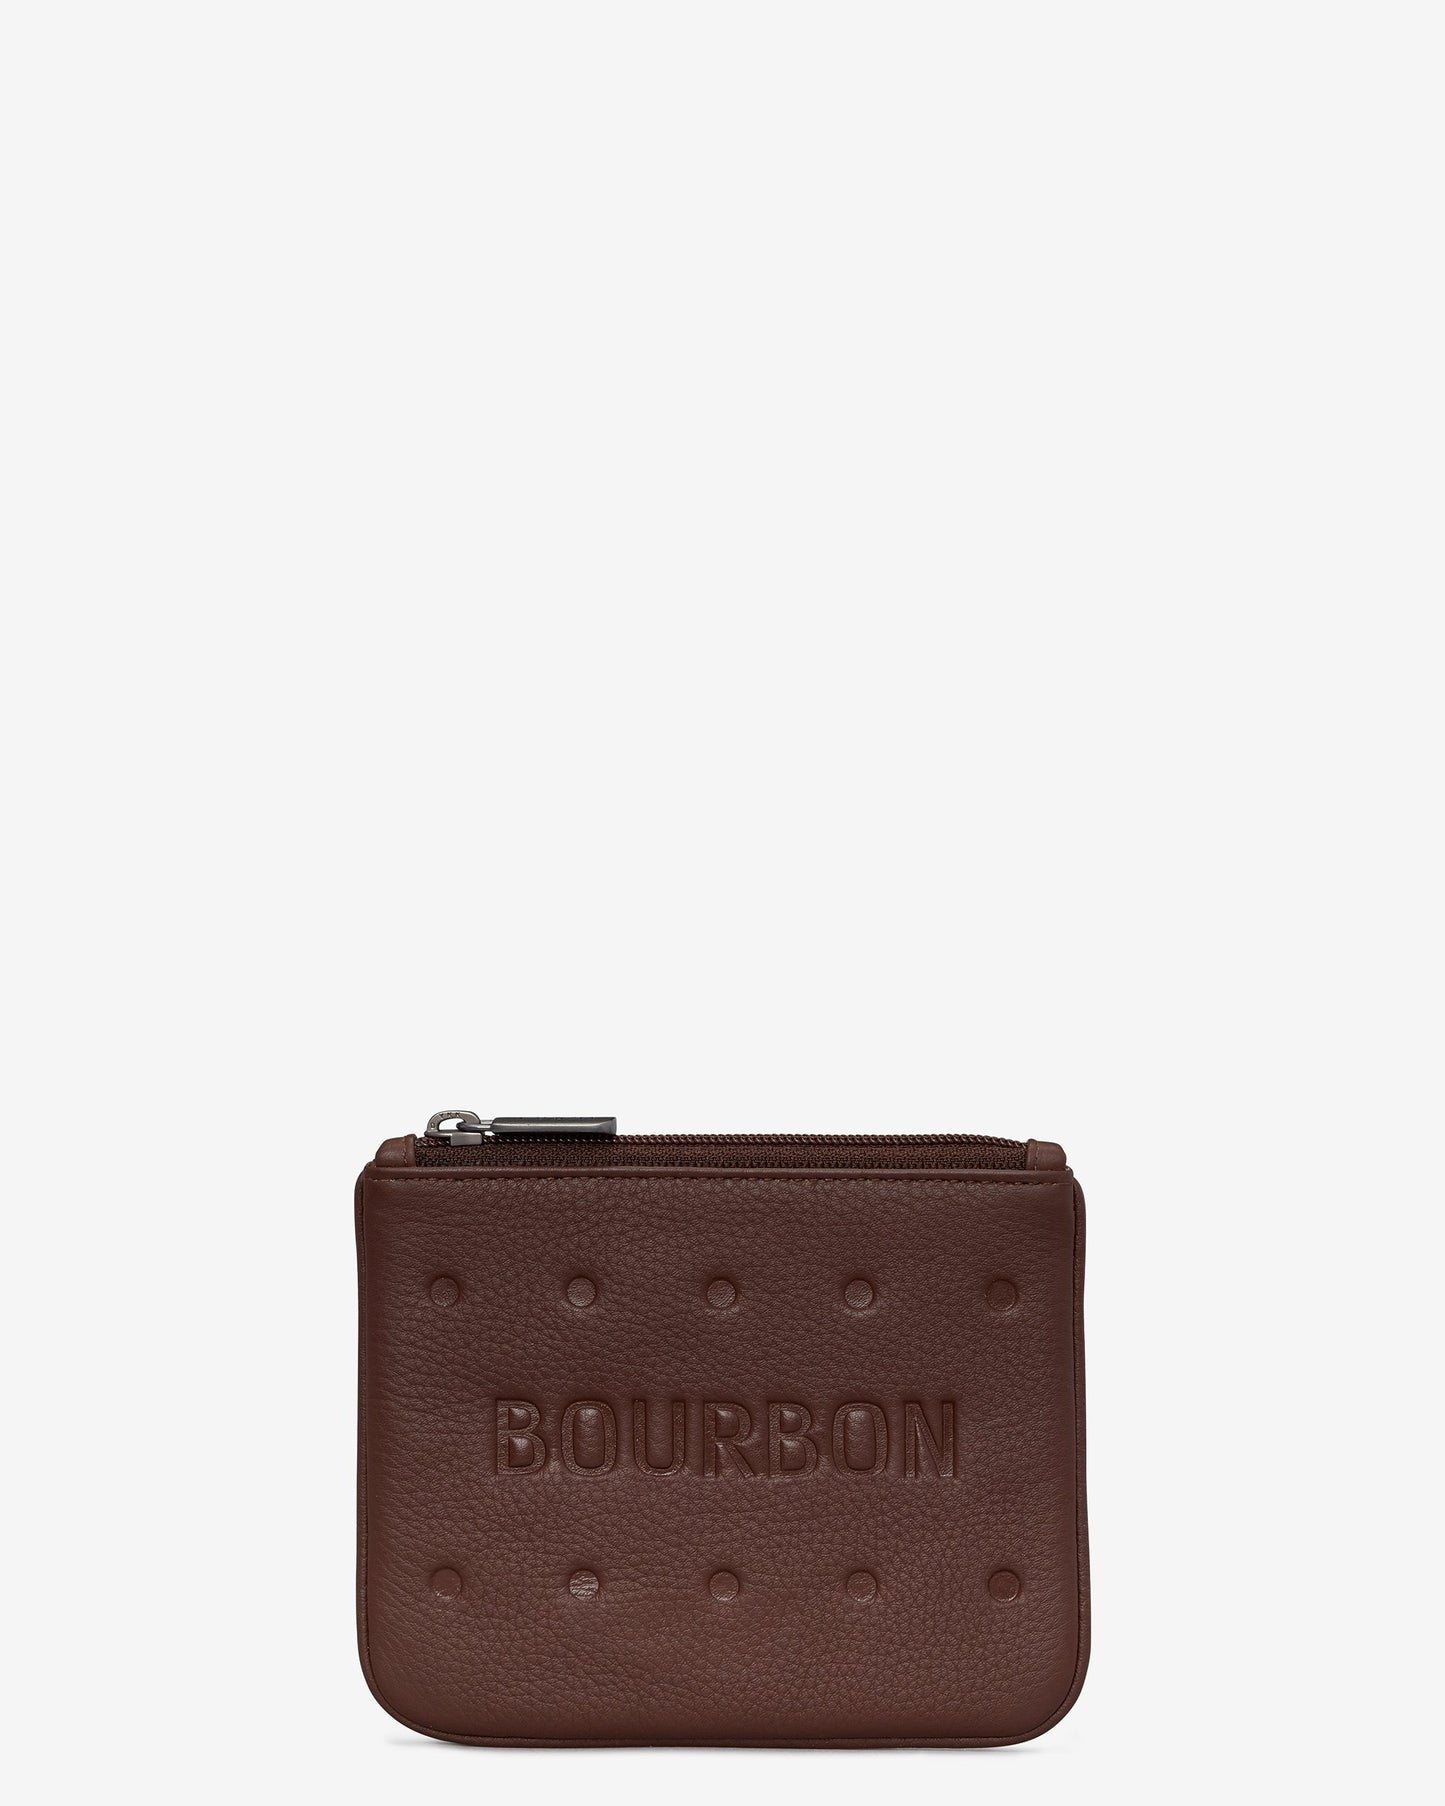 Yoshi Leather Bourbon Biscuit Coin Purse